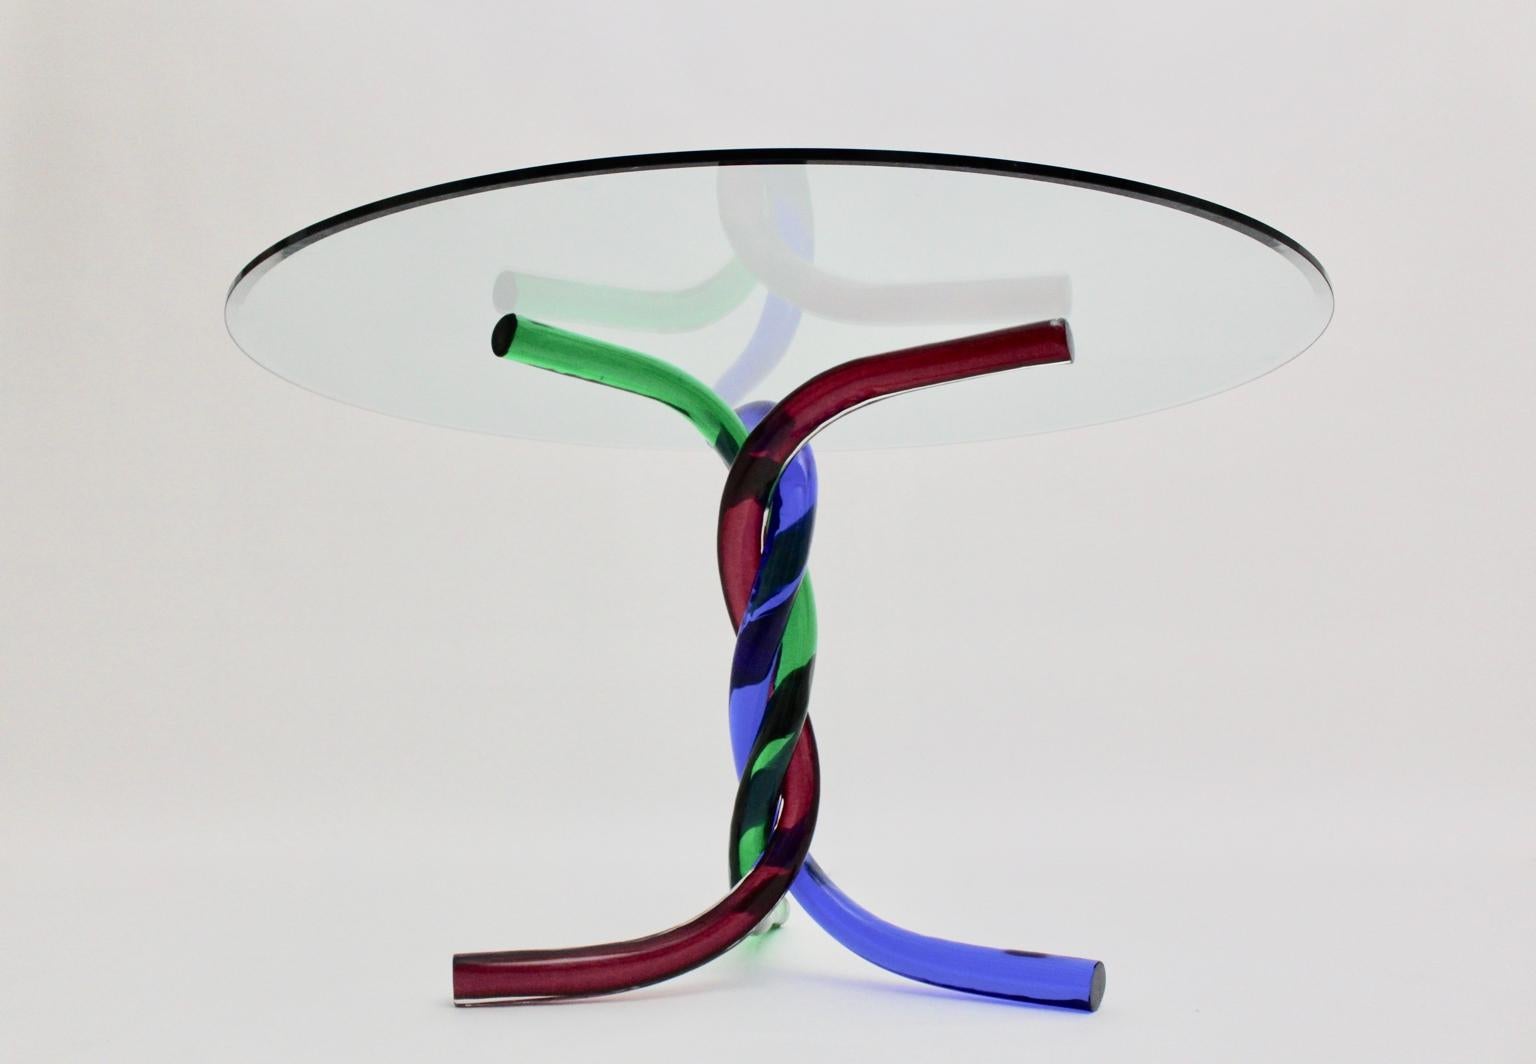 Mid-Century Modern vintage glass dining table or center table, which was designed and manufactured in Murano, Italy 1970. The rare dining table features a colorful base of three curved glass elements in the colors red, blue and green with a round